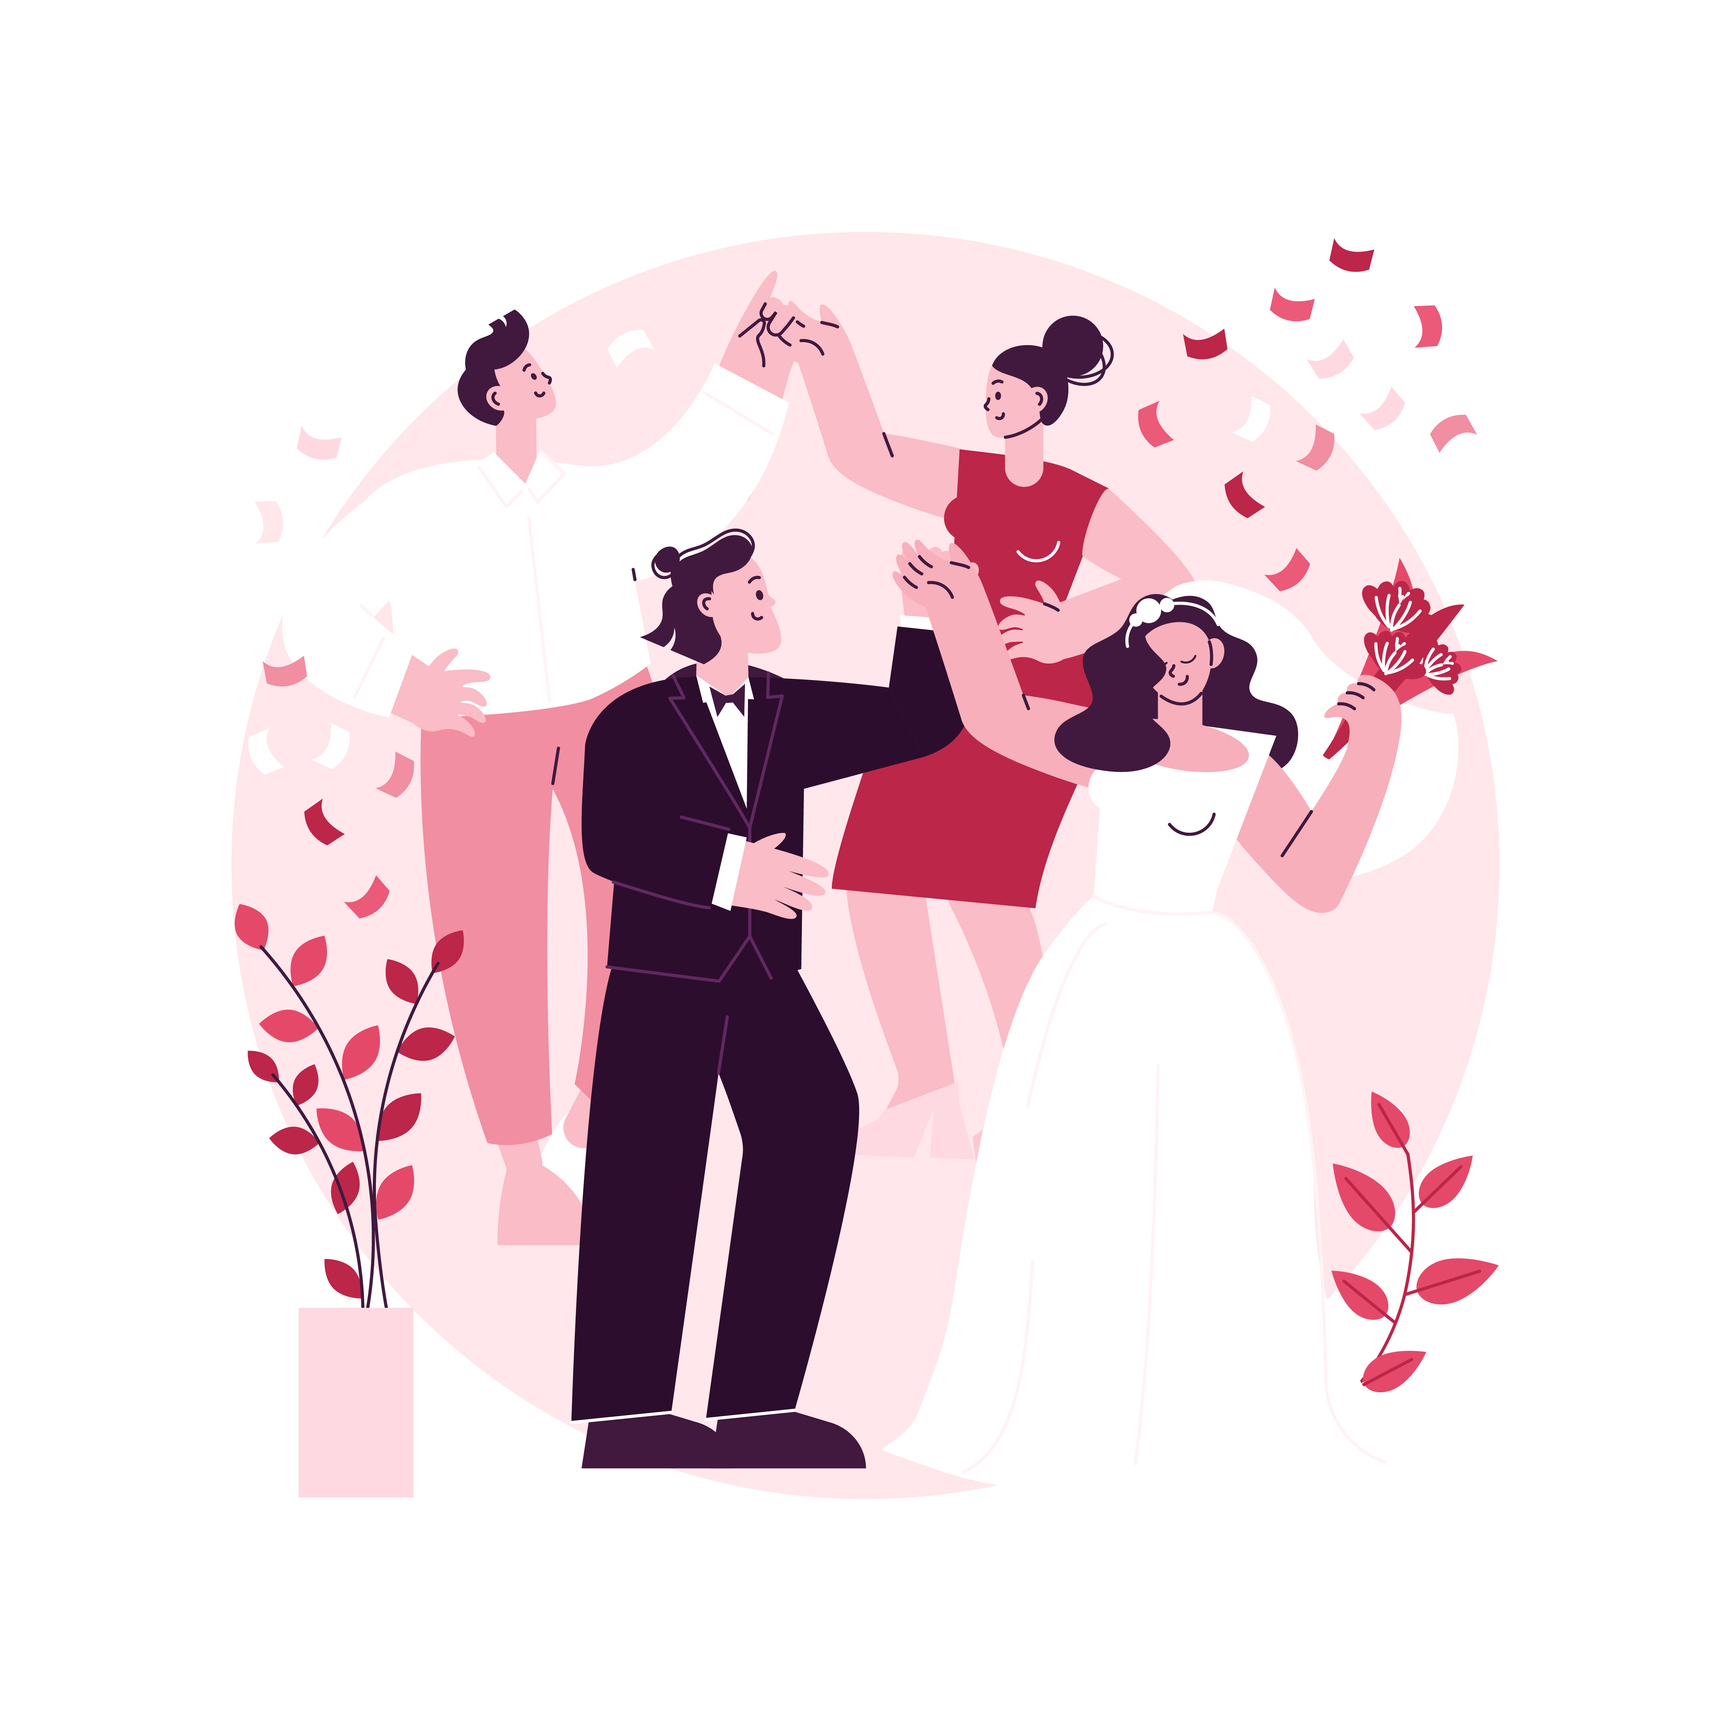 Wedding party abstract concept vector illustration.